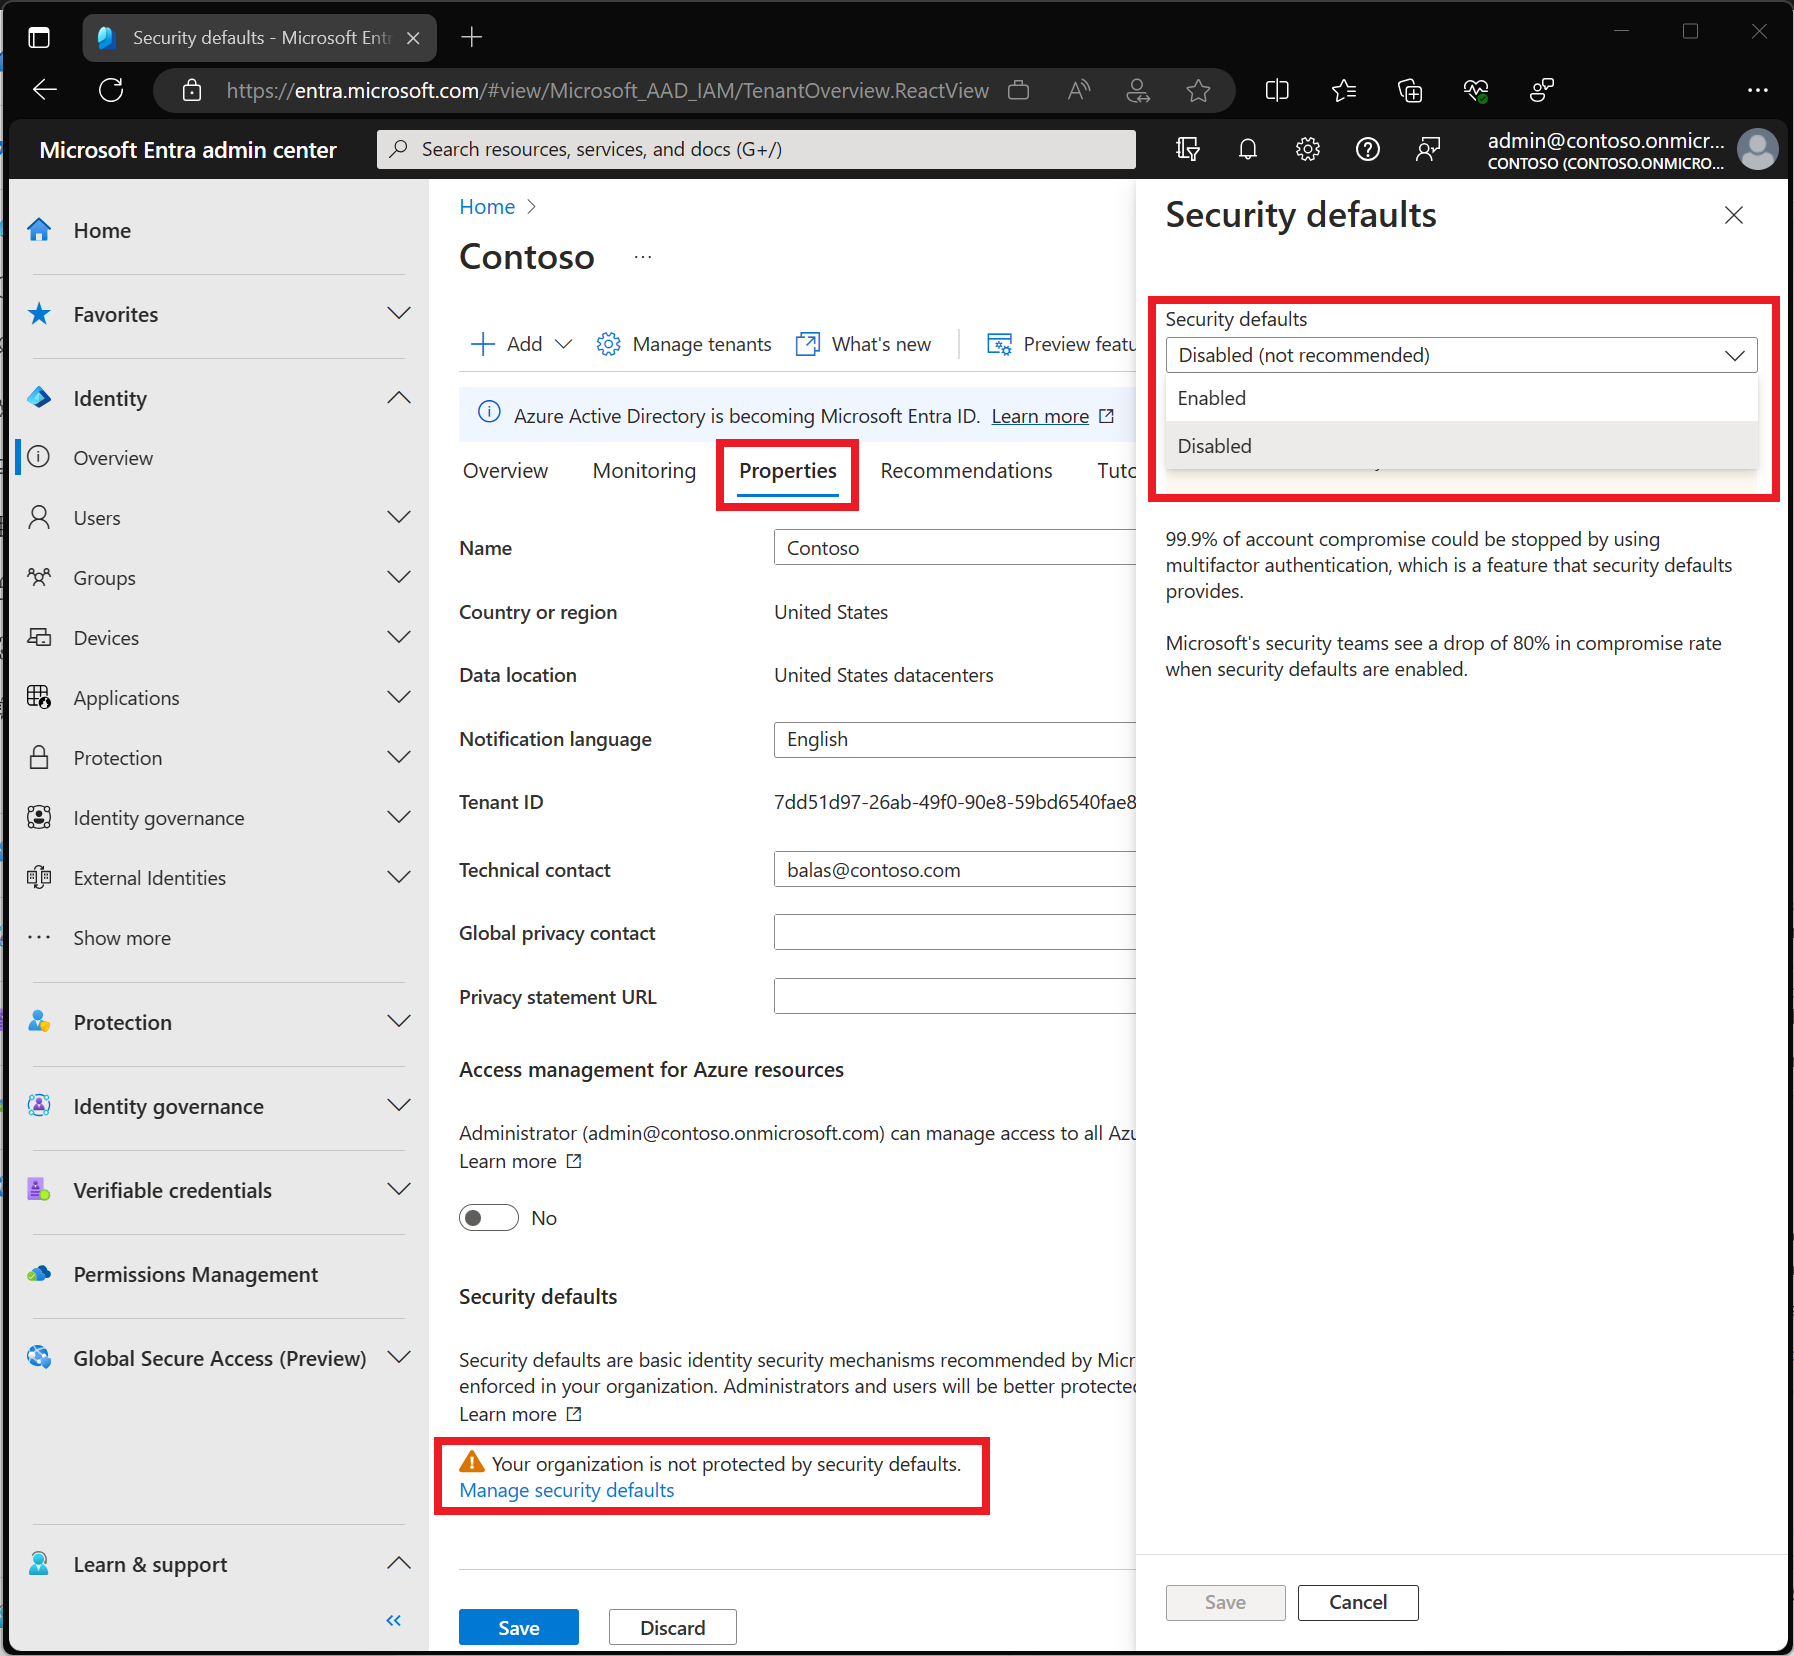 Log in to the Microsoft 365 admin center using an alternative admin account
Go to the 'Active users' section to check the status of the locked account